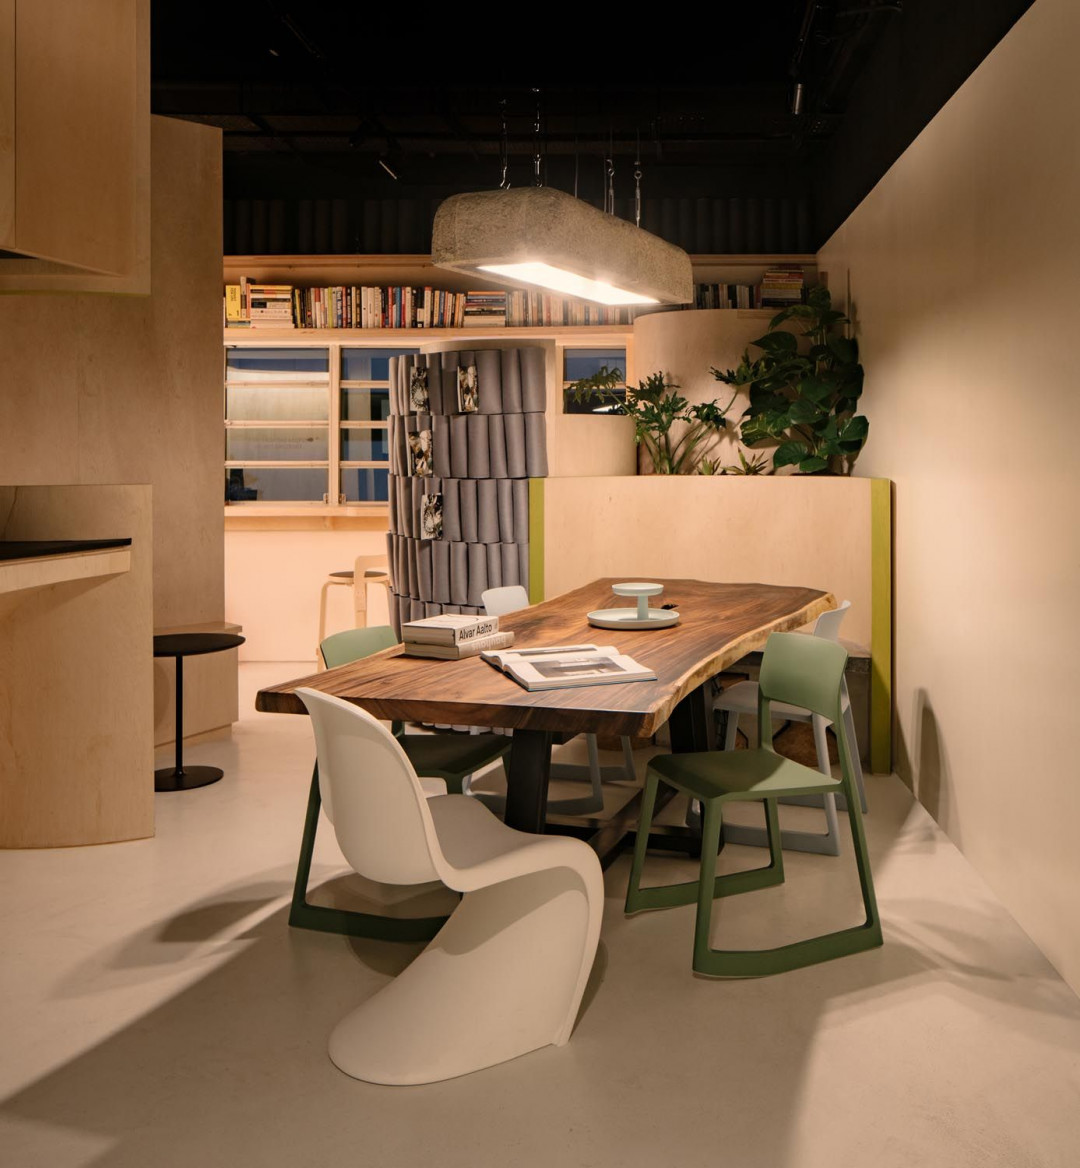 Studio SKLIM Converts a 32-Square-Metre Space into a Compact Multifunctional Office